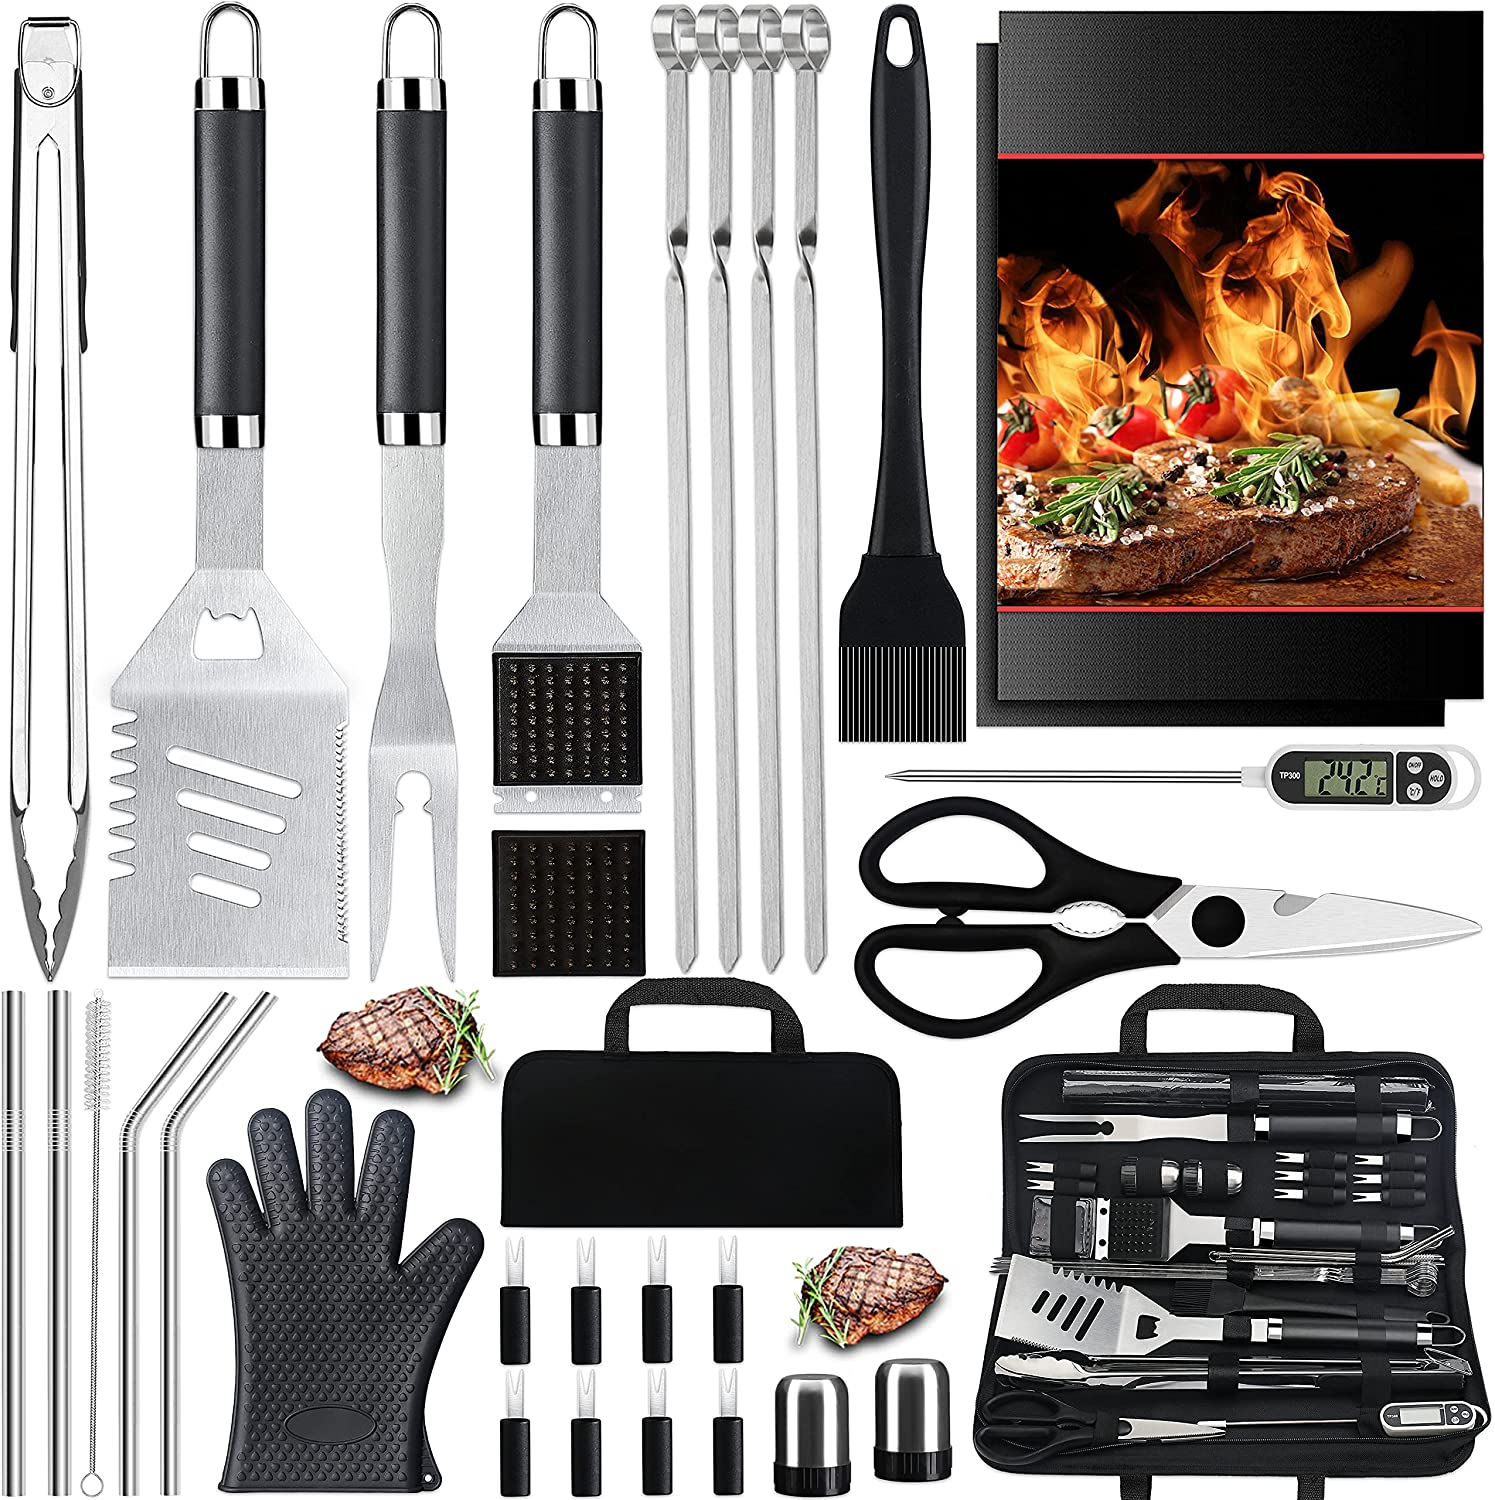 31PC Heavy Duty BBQ Grilling Accessories Grill Tools Set - Stainless Steel Grilling Kit with Storage Bag for Camping, Tailgating - Perfect Barbecue Utensil Gift for Men Women